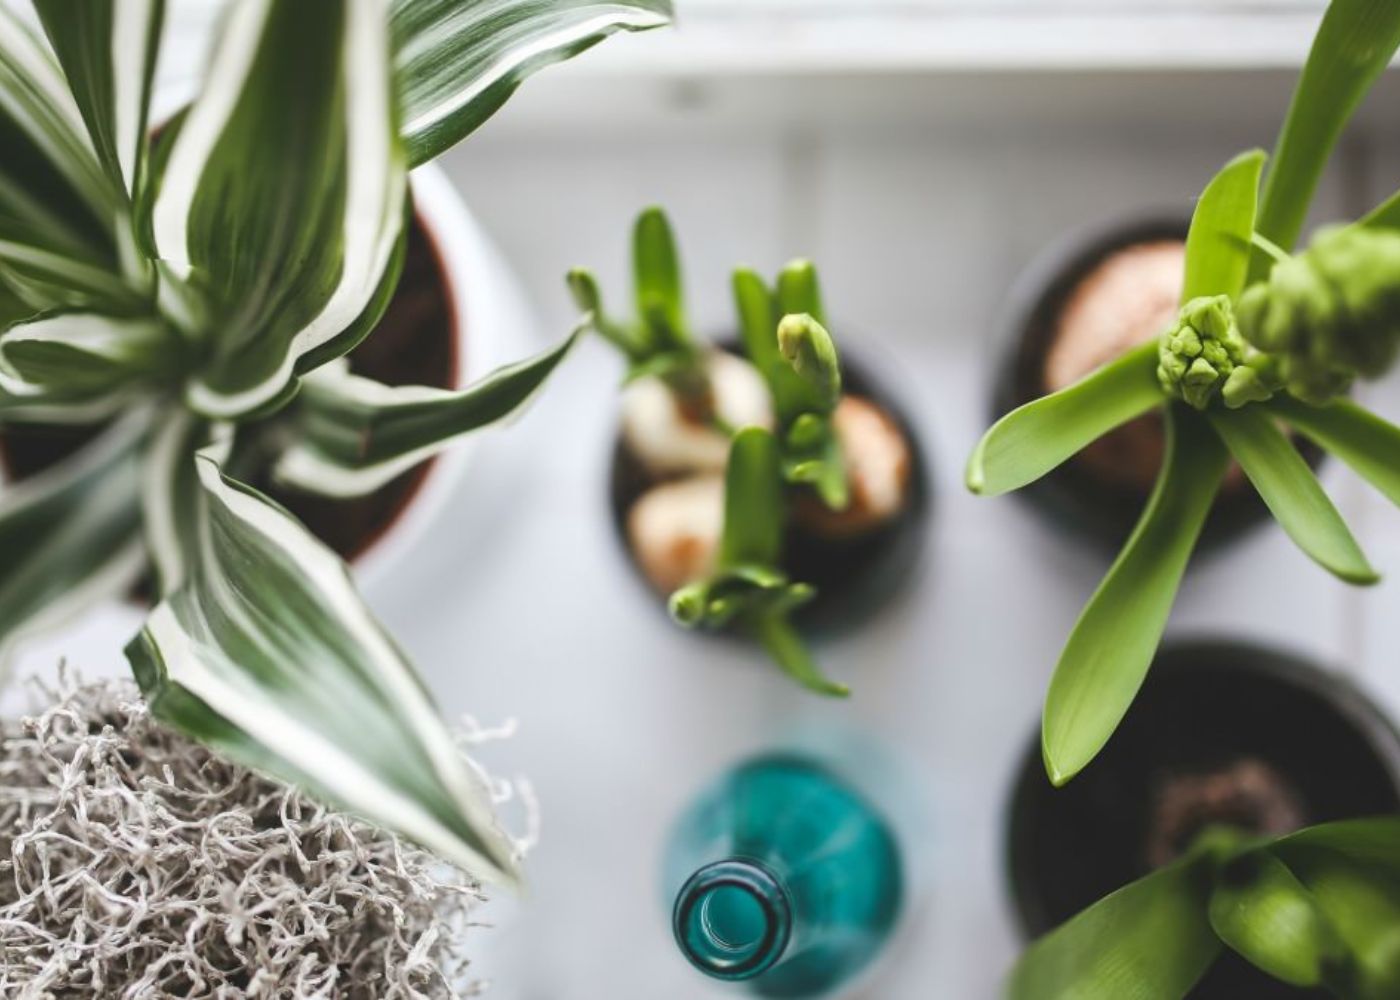 7 House Plants with Aromatherapy Benefits to Improve Your Mental Health